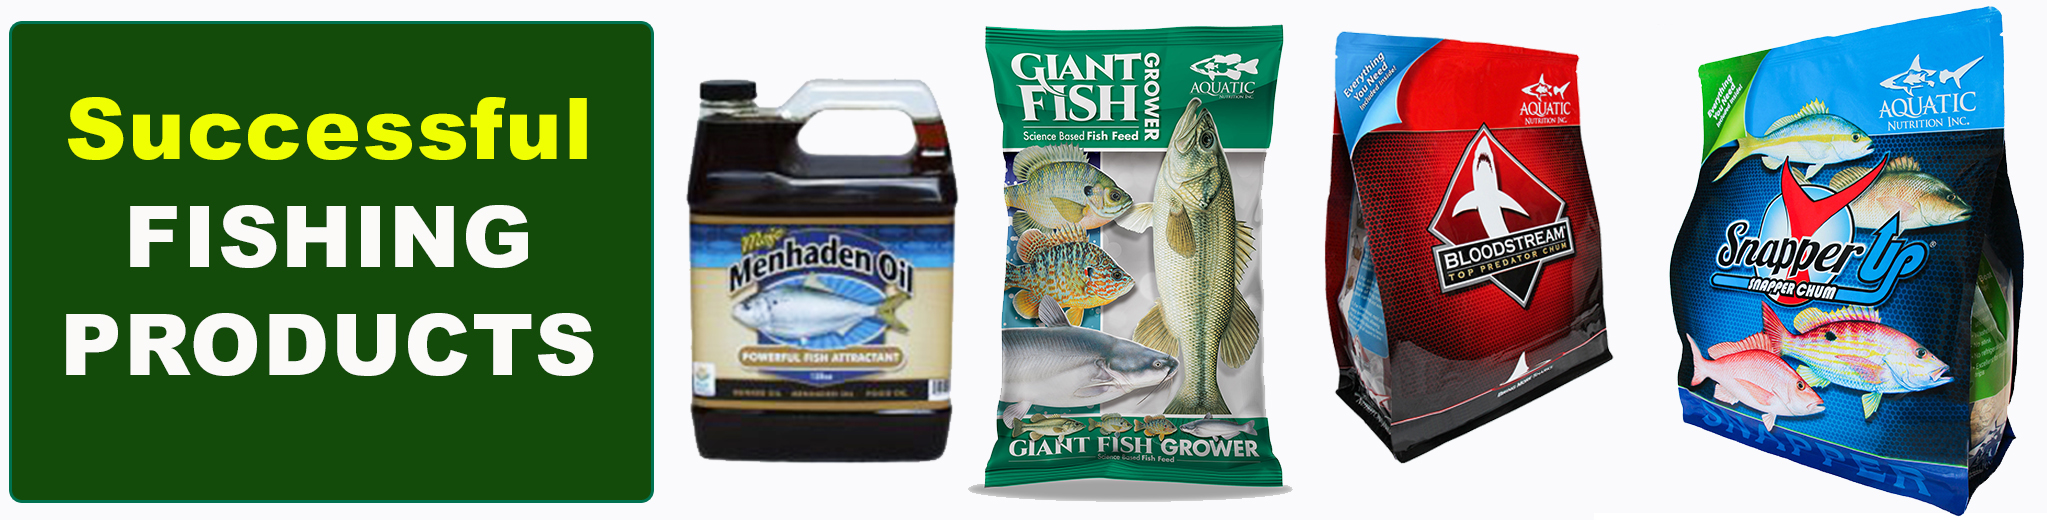 Aquatic Nutrition, Quality Aquatic Diets and Fishing Products by